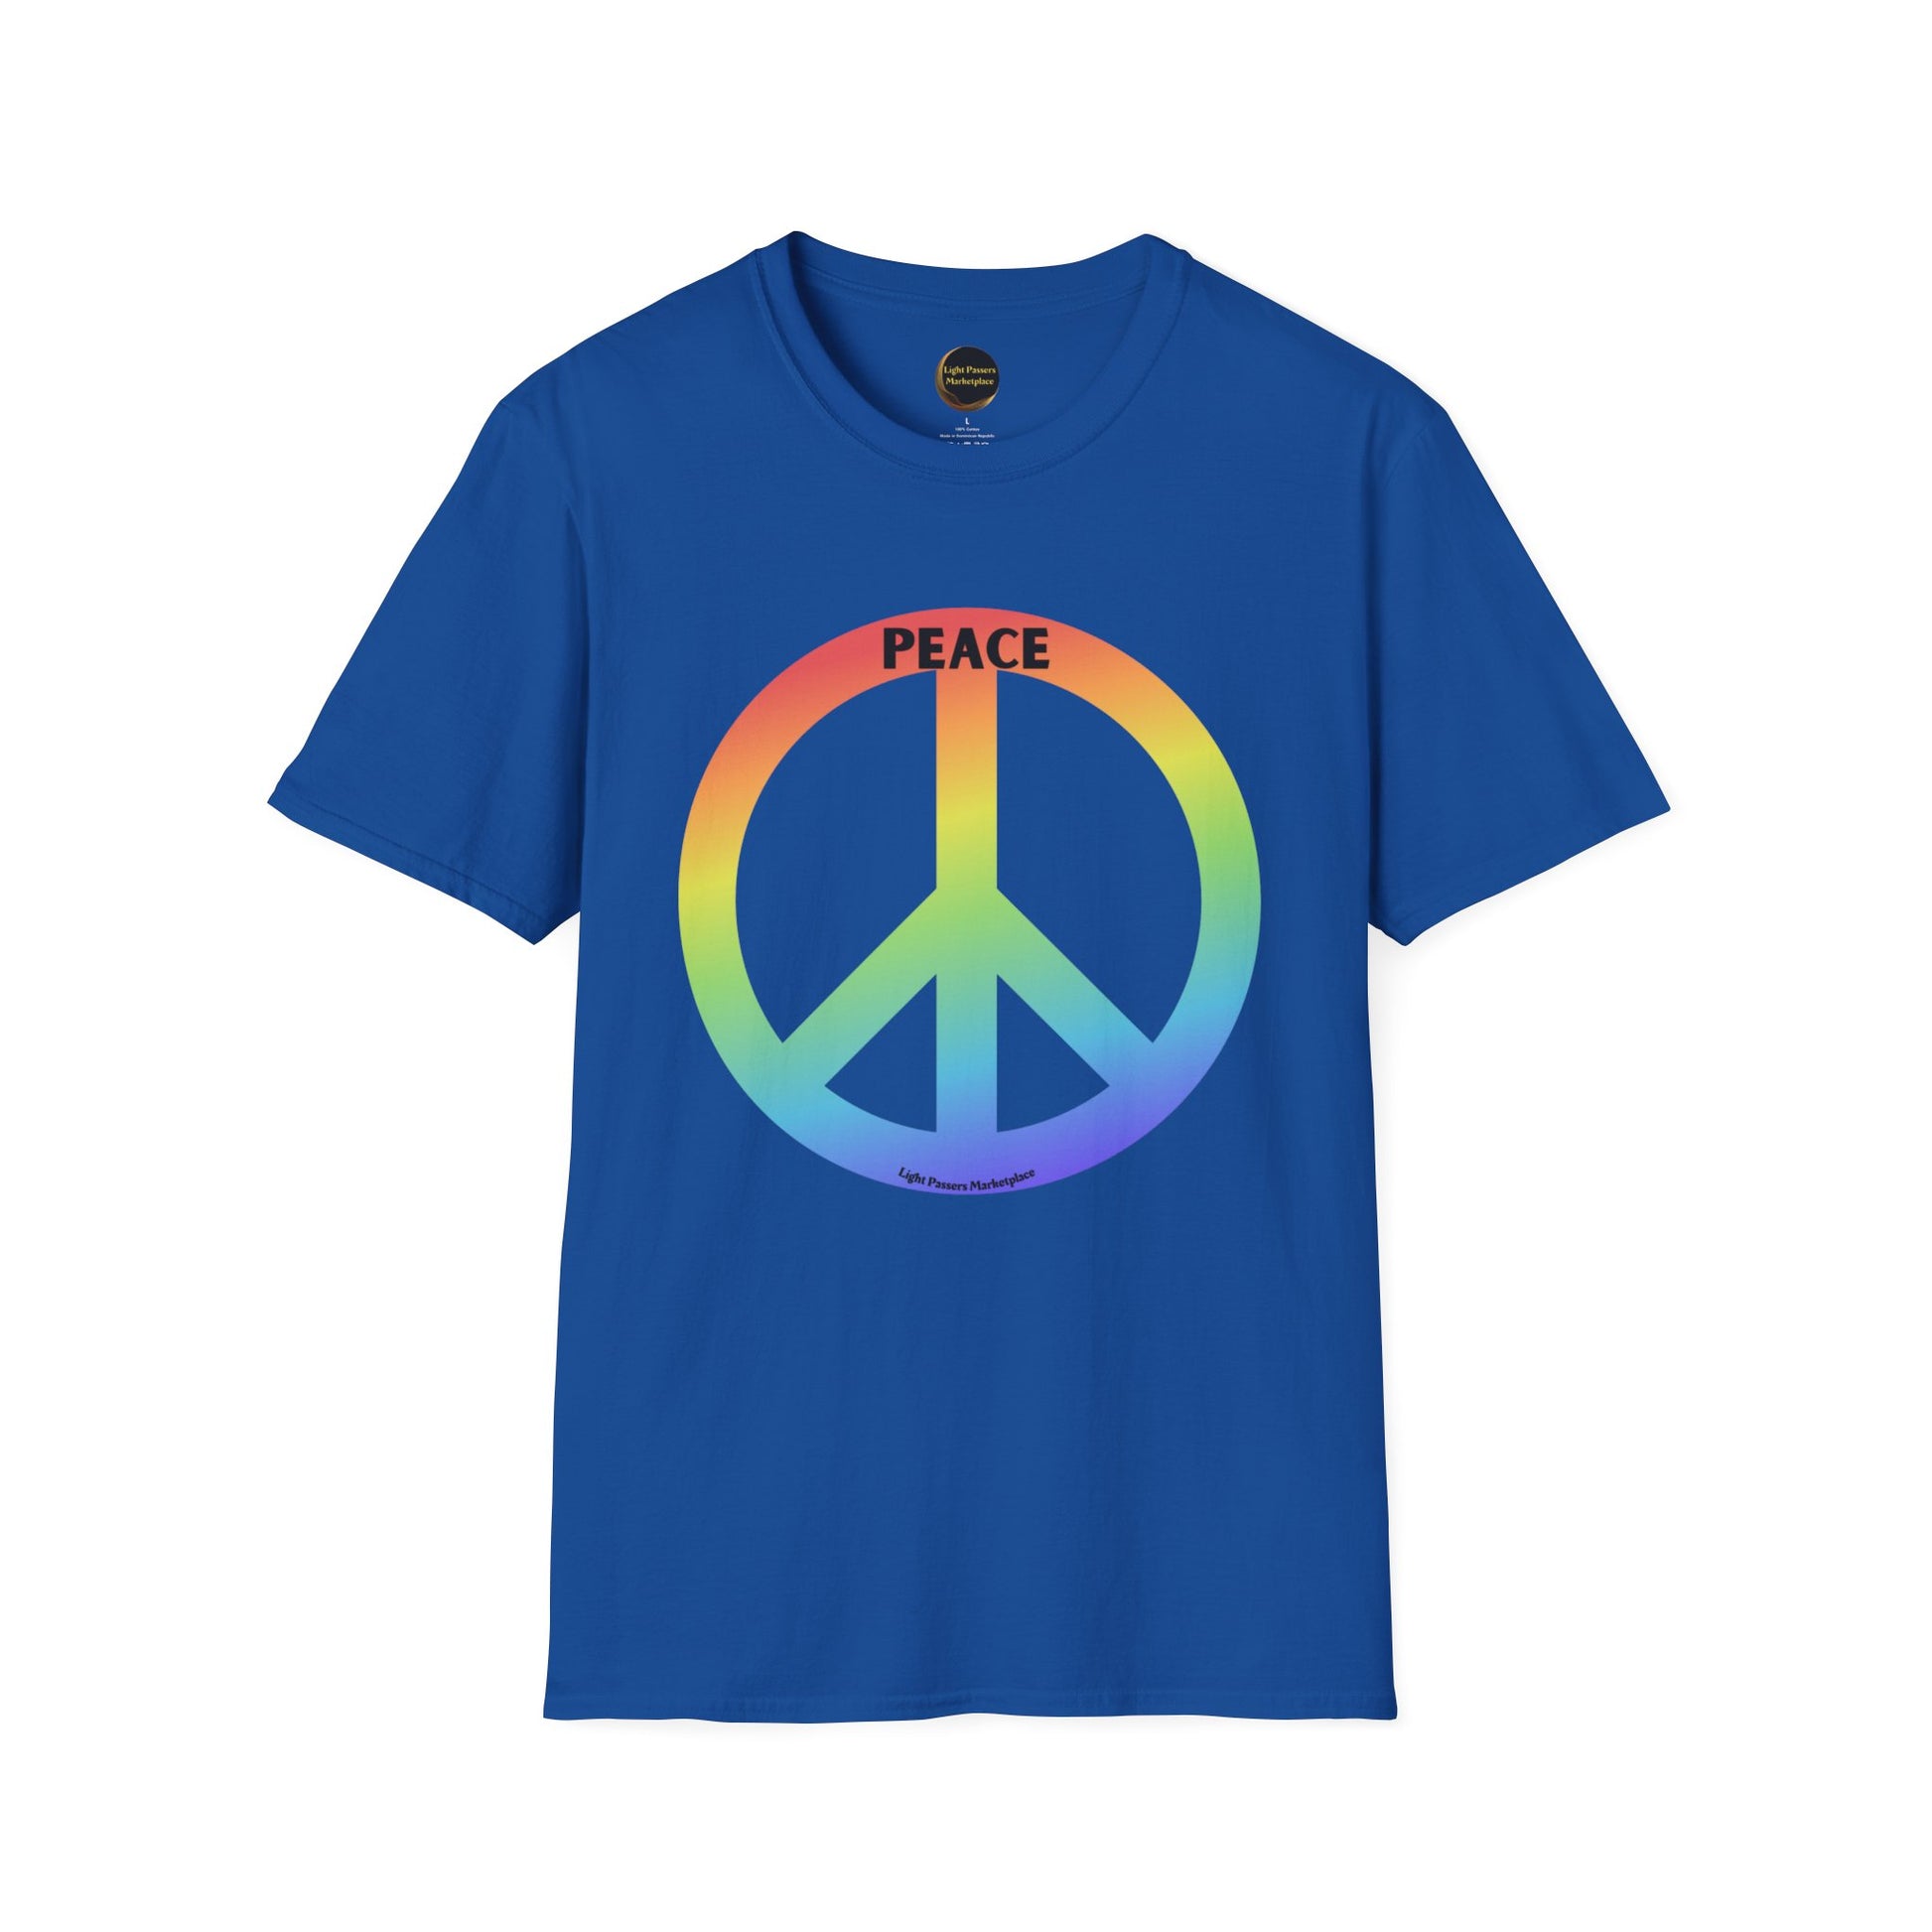 A blue unisex T-shirt featuring a peace sign symbol, made of soft 100% cotton with twill tape shoulders and no side seams. Lightweight and versatile for year-round comfort. Ethically sourced and Oeko-Tex certified.